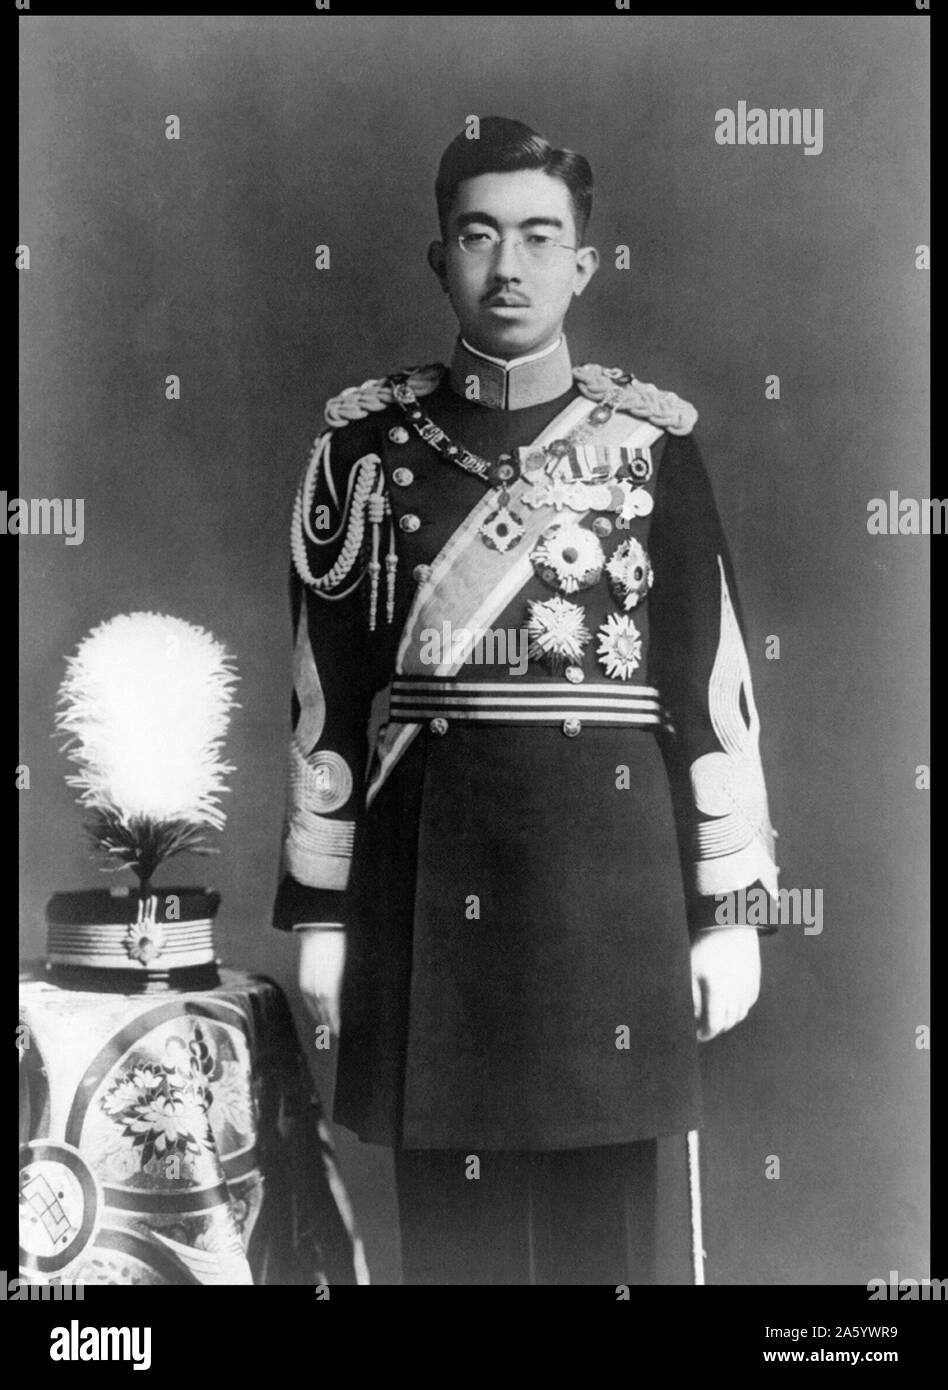 Photograph of Emperor Sh?wa (1901-1989) Emperor of Japan, also known as Hirohito, in Dress Uniform. Dated 1935 Stock Photo